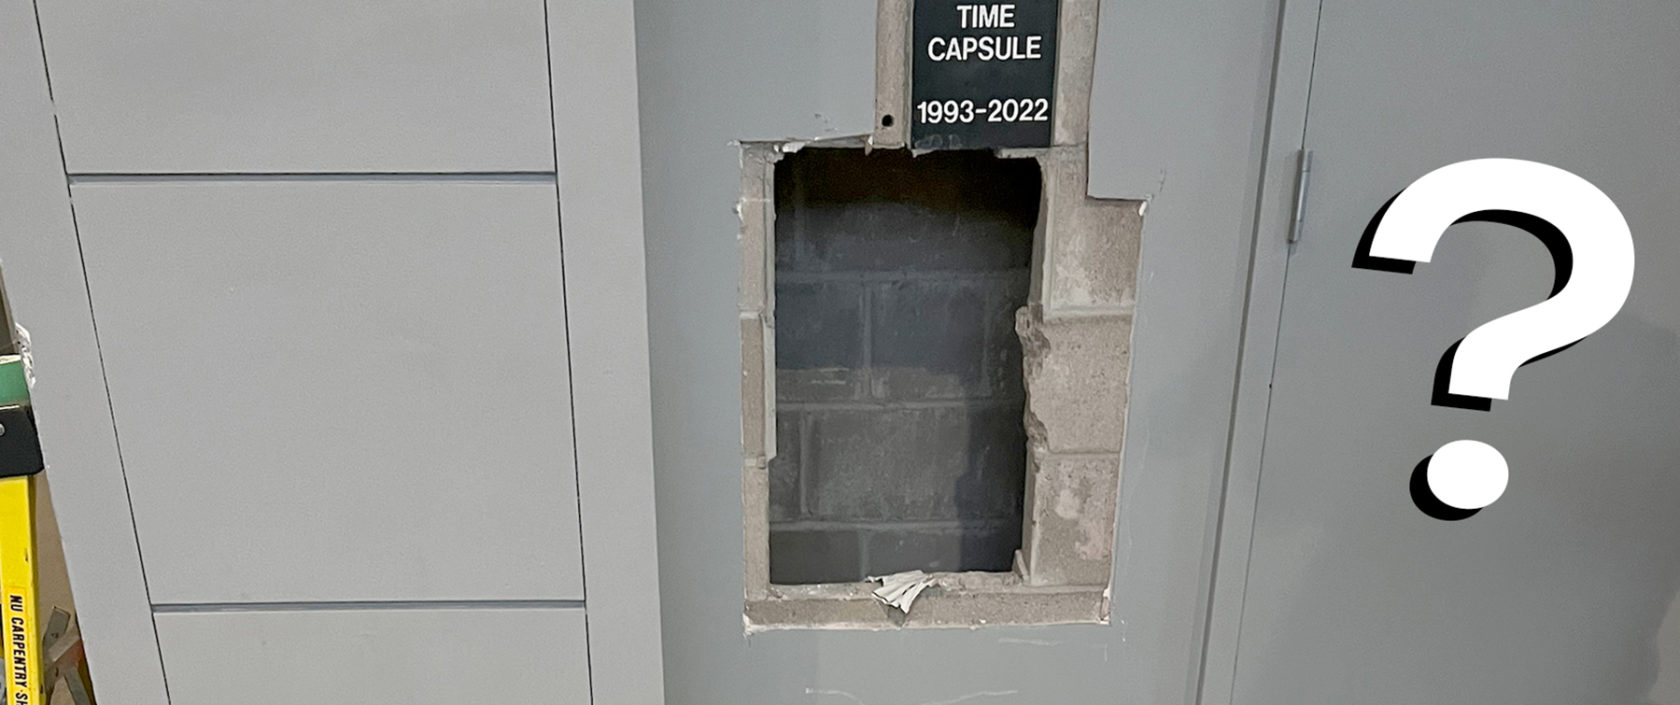 A hole in the wall in Dodge Hall where the time capsule was